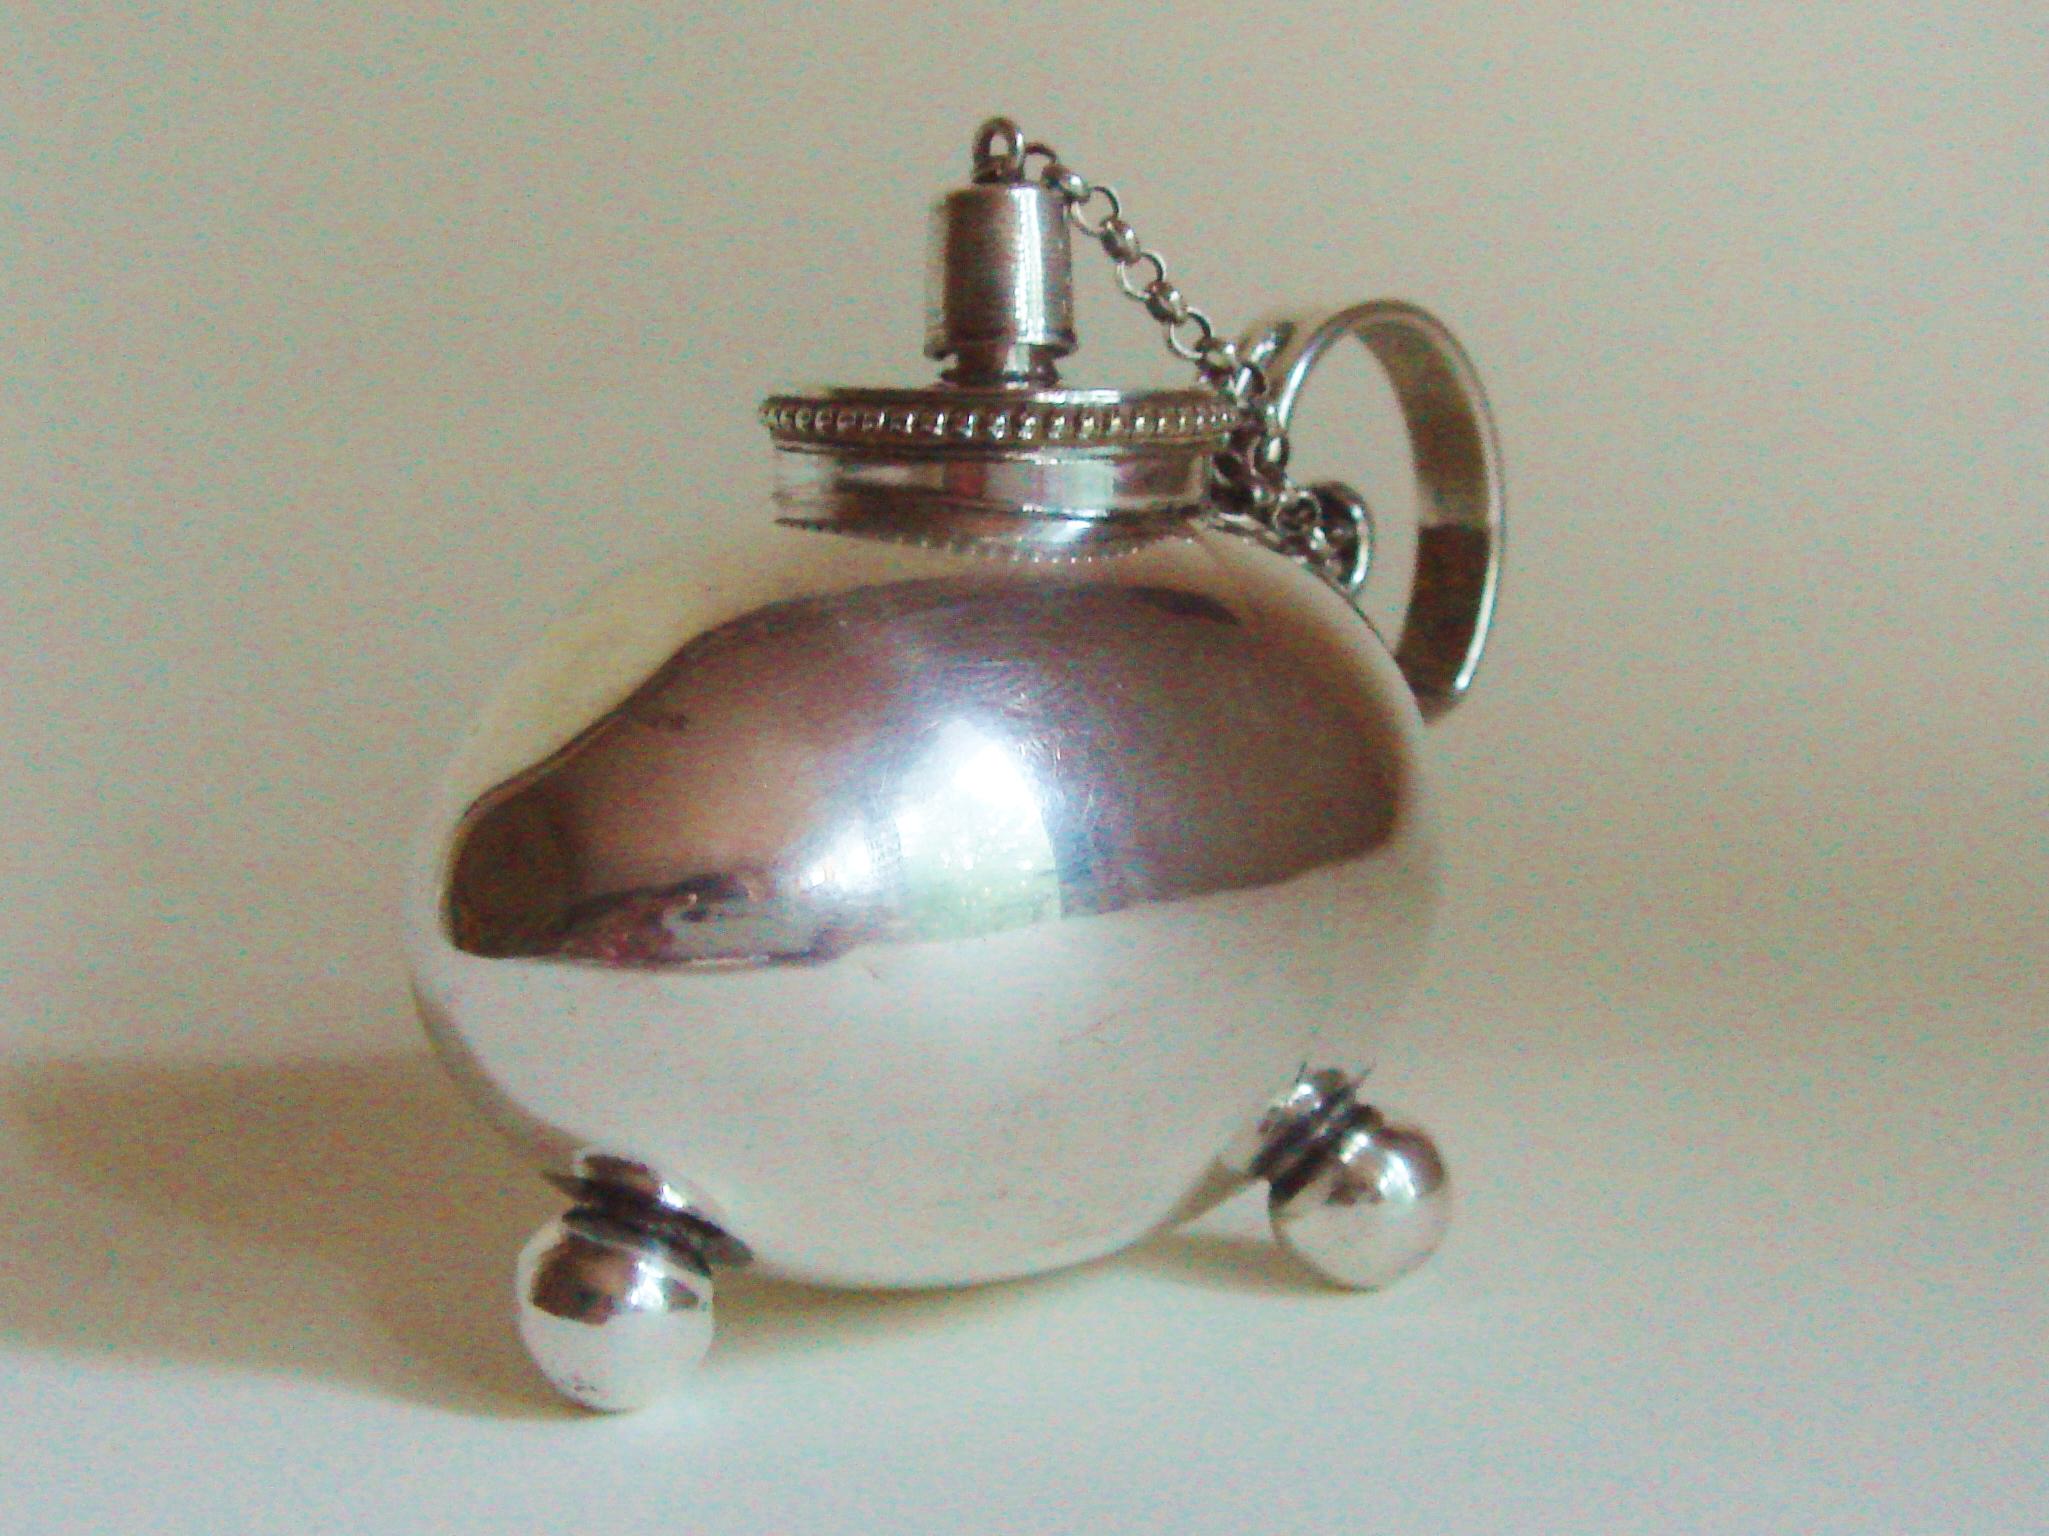 This wonderful silver plated German Jugendstil oil lamp/table cigar lighter is in the shape of an egg and stands on three spherical feet. It has a chamber-stick type handle presumably for passing the lighter round among the assembled gentlemen when